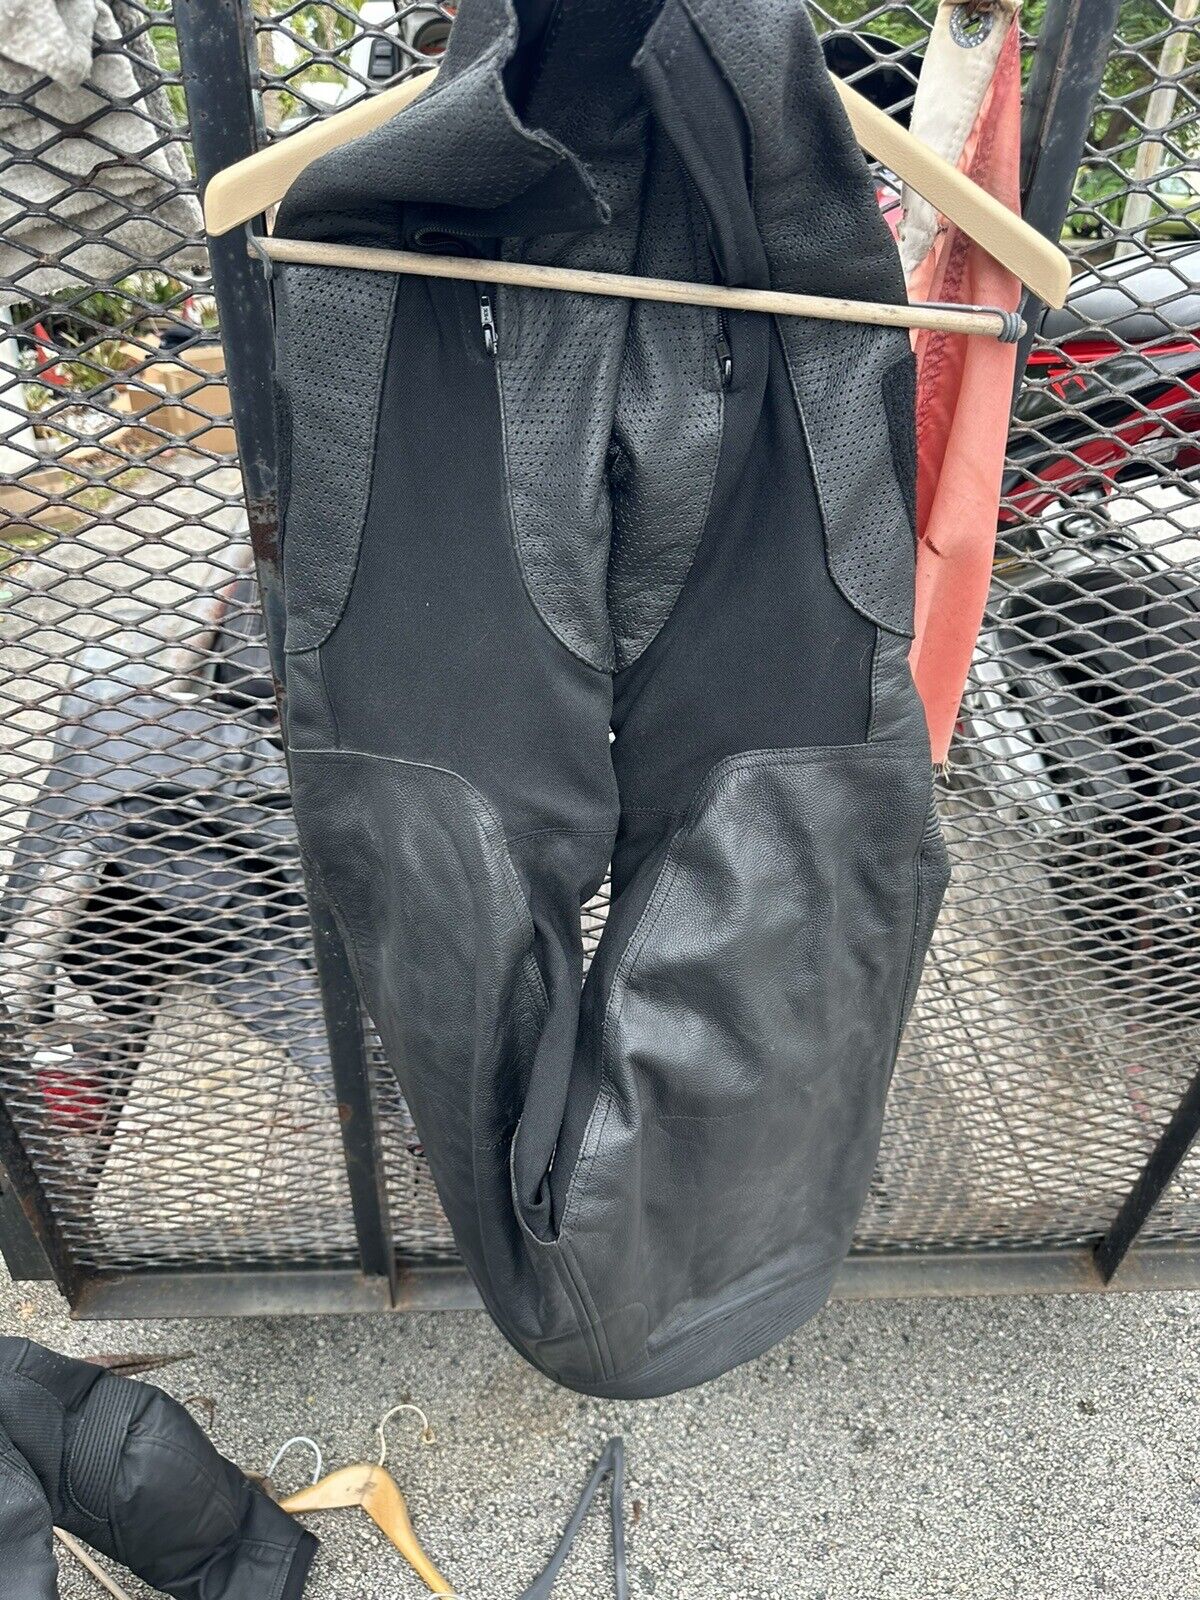 SOLD SOLD Joe Rocket Leather Motorcycle Pants CE Armored - US 32